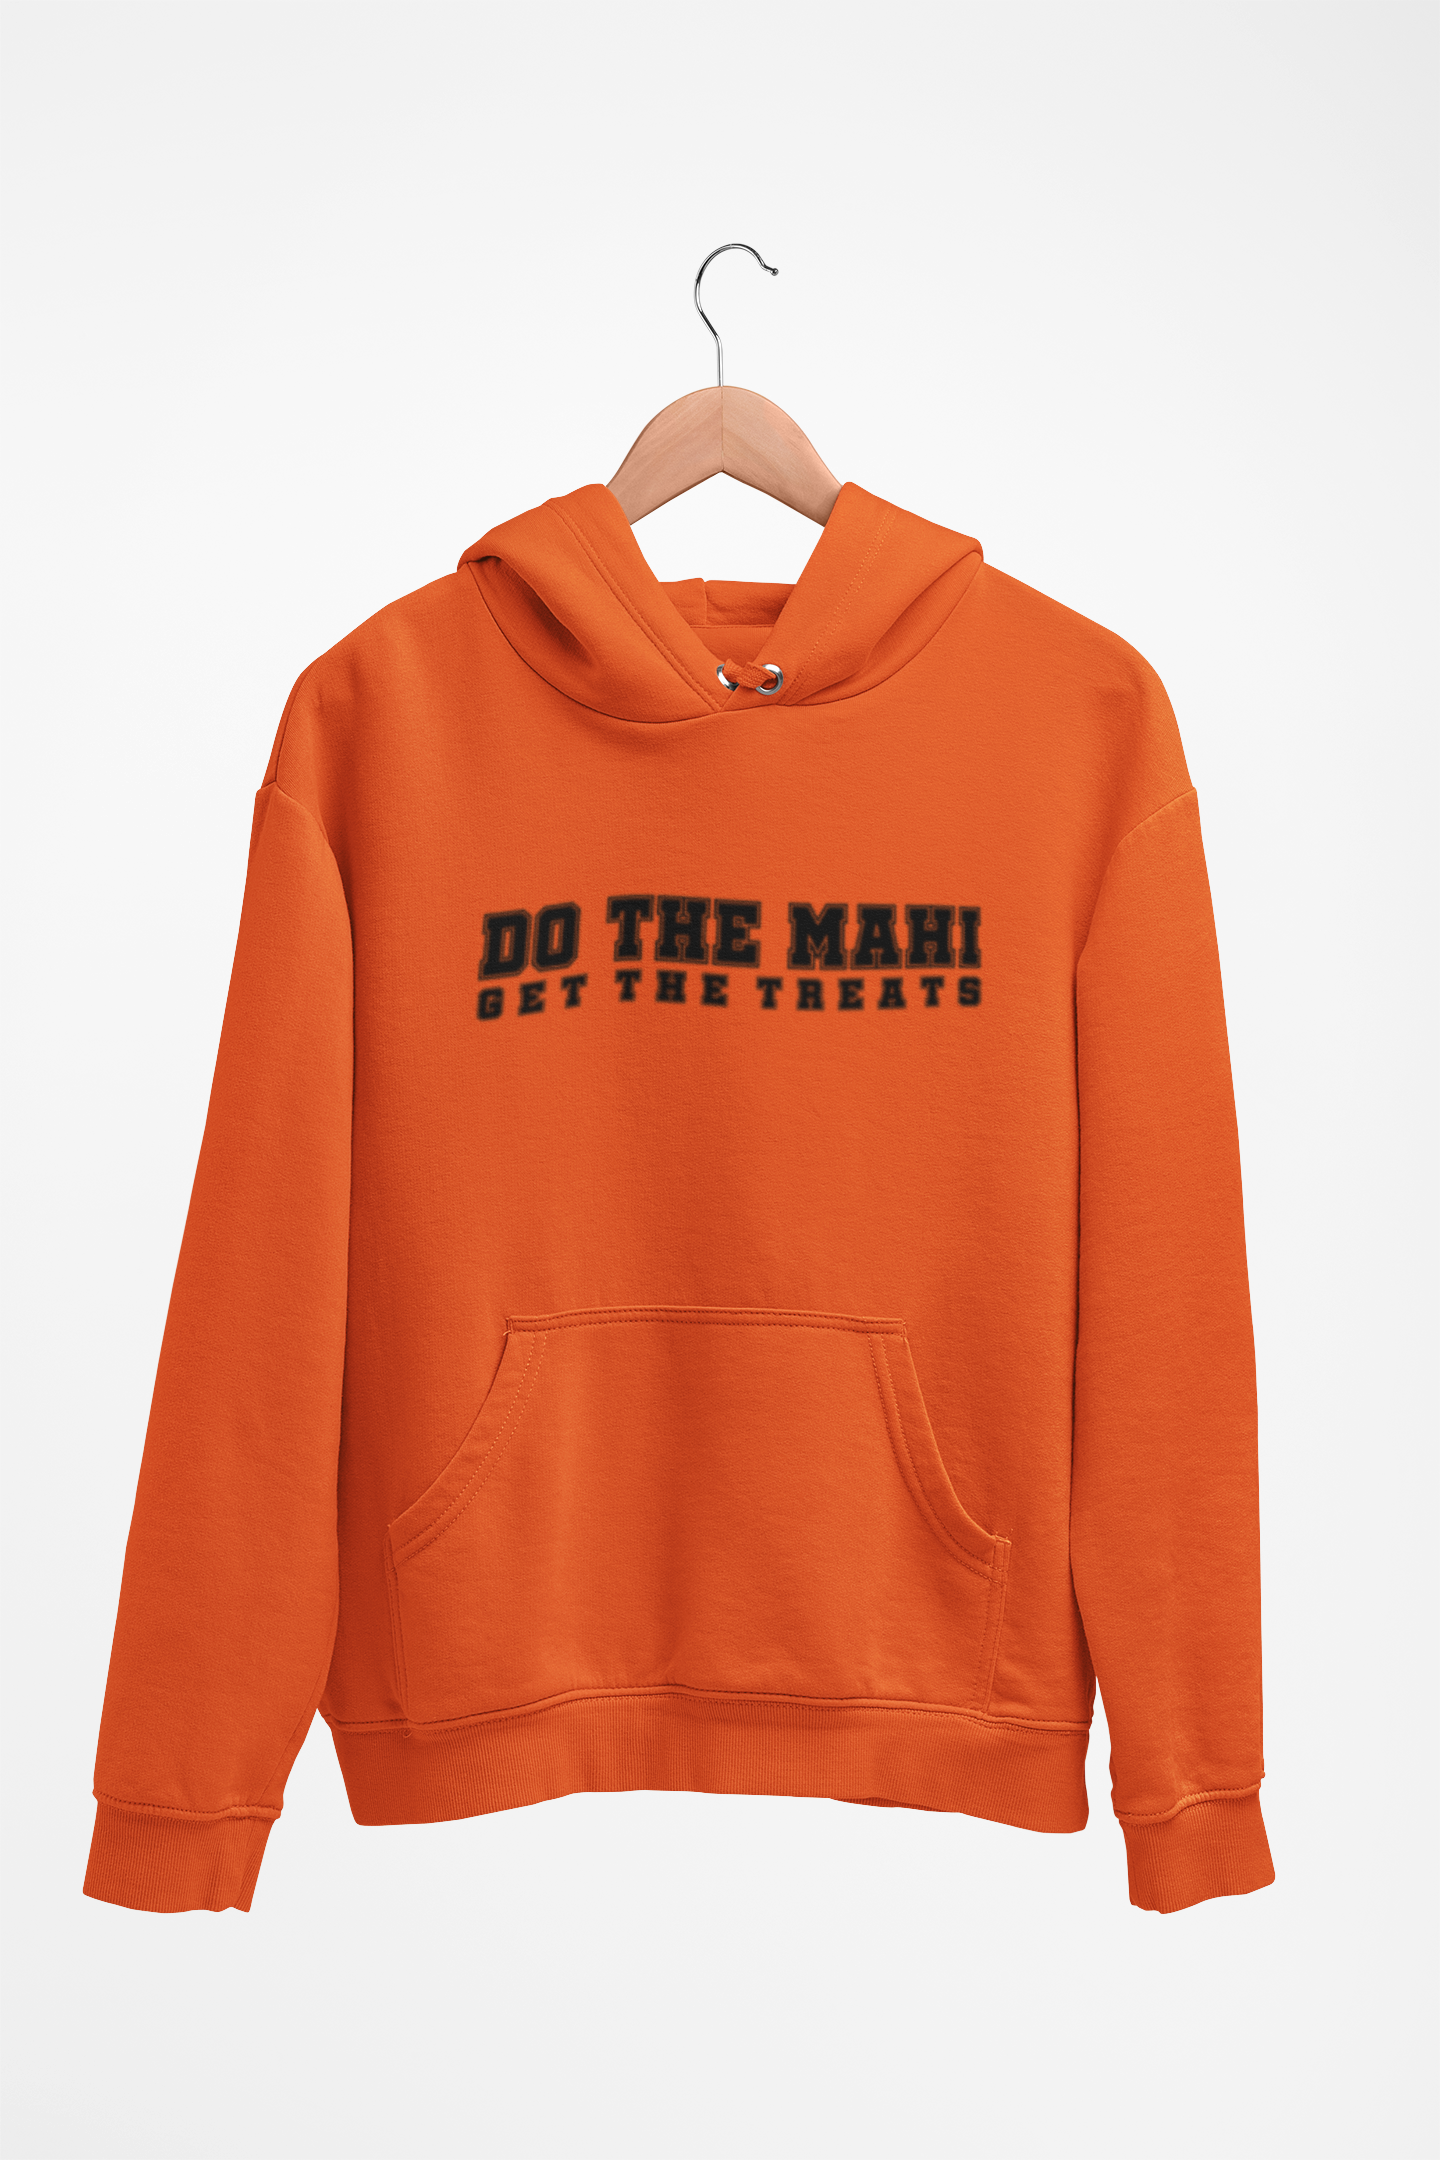 DTM, Get The Treats (black text) - Adult Hoodie